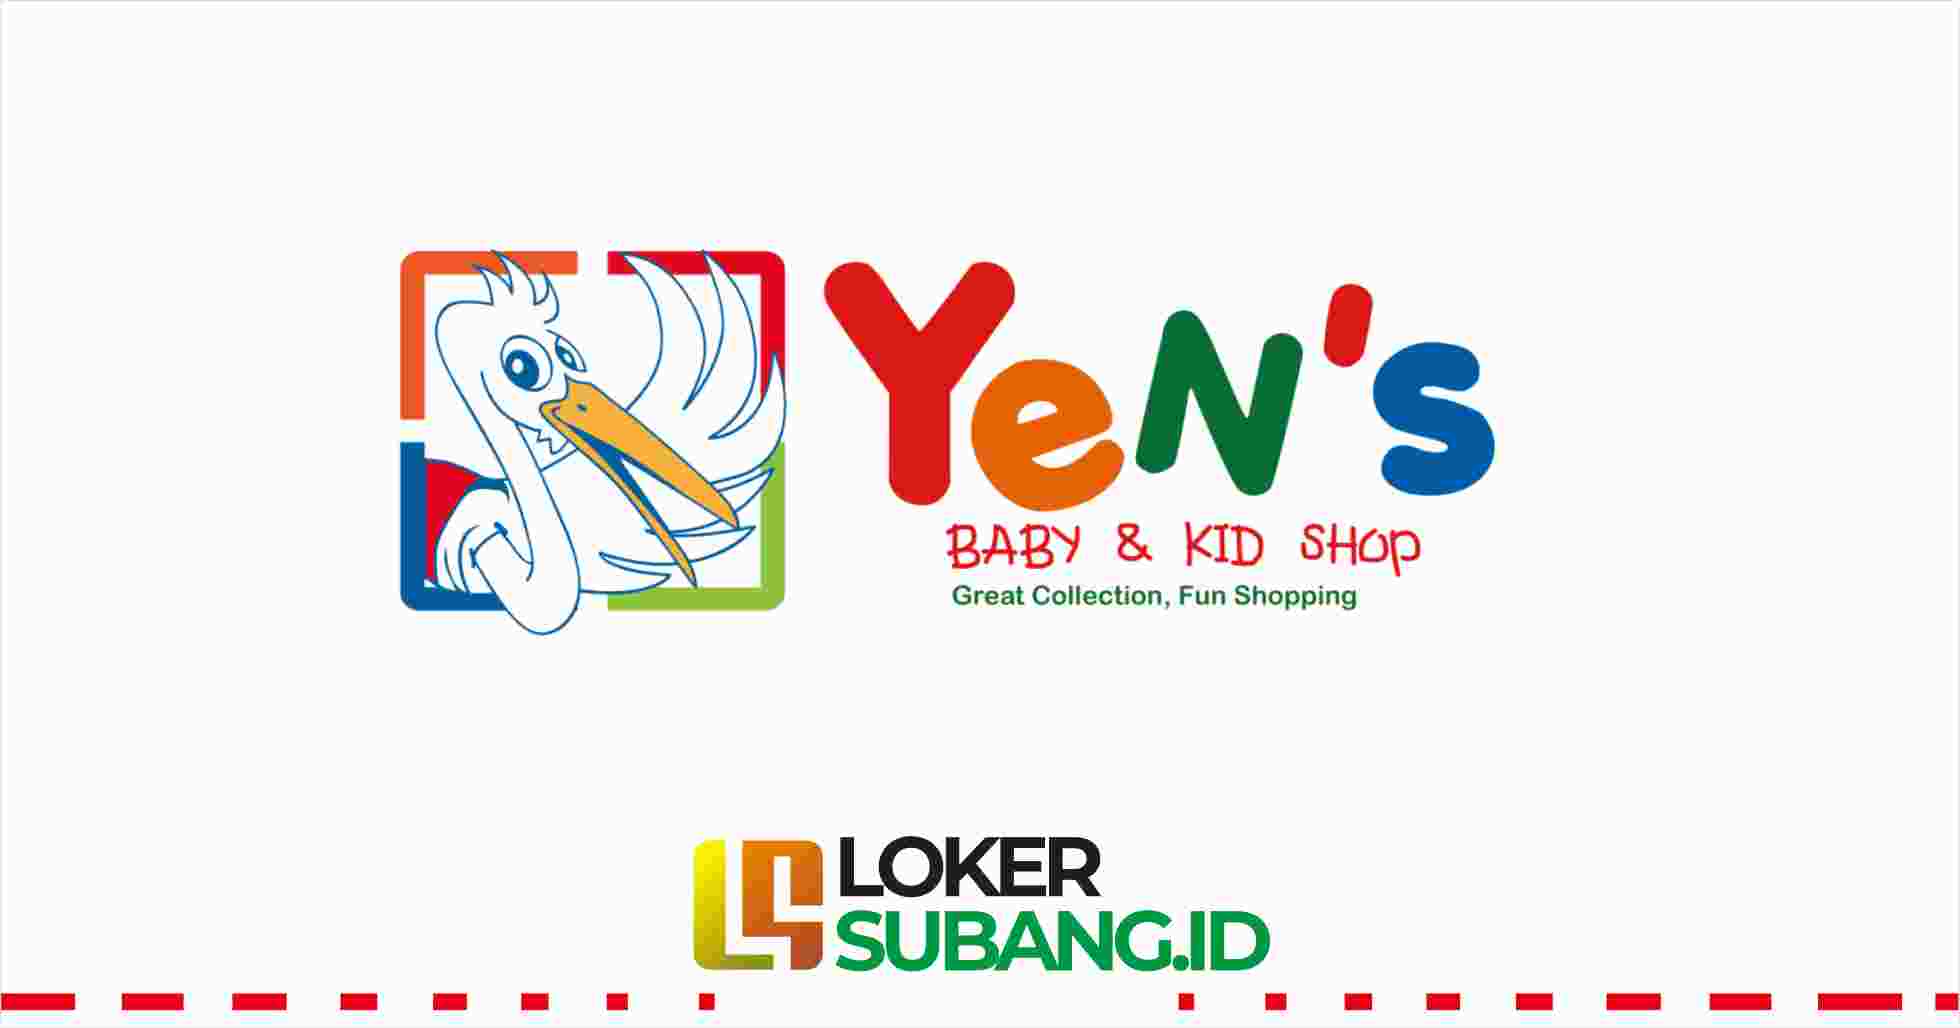 Yens Baby Kids and Shop